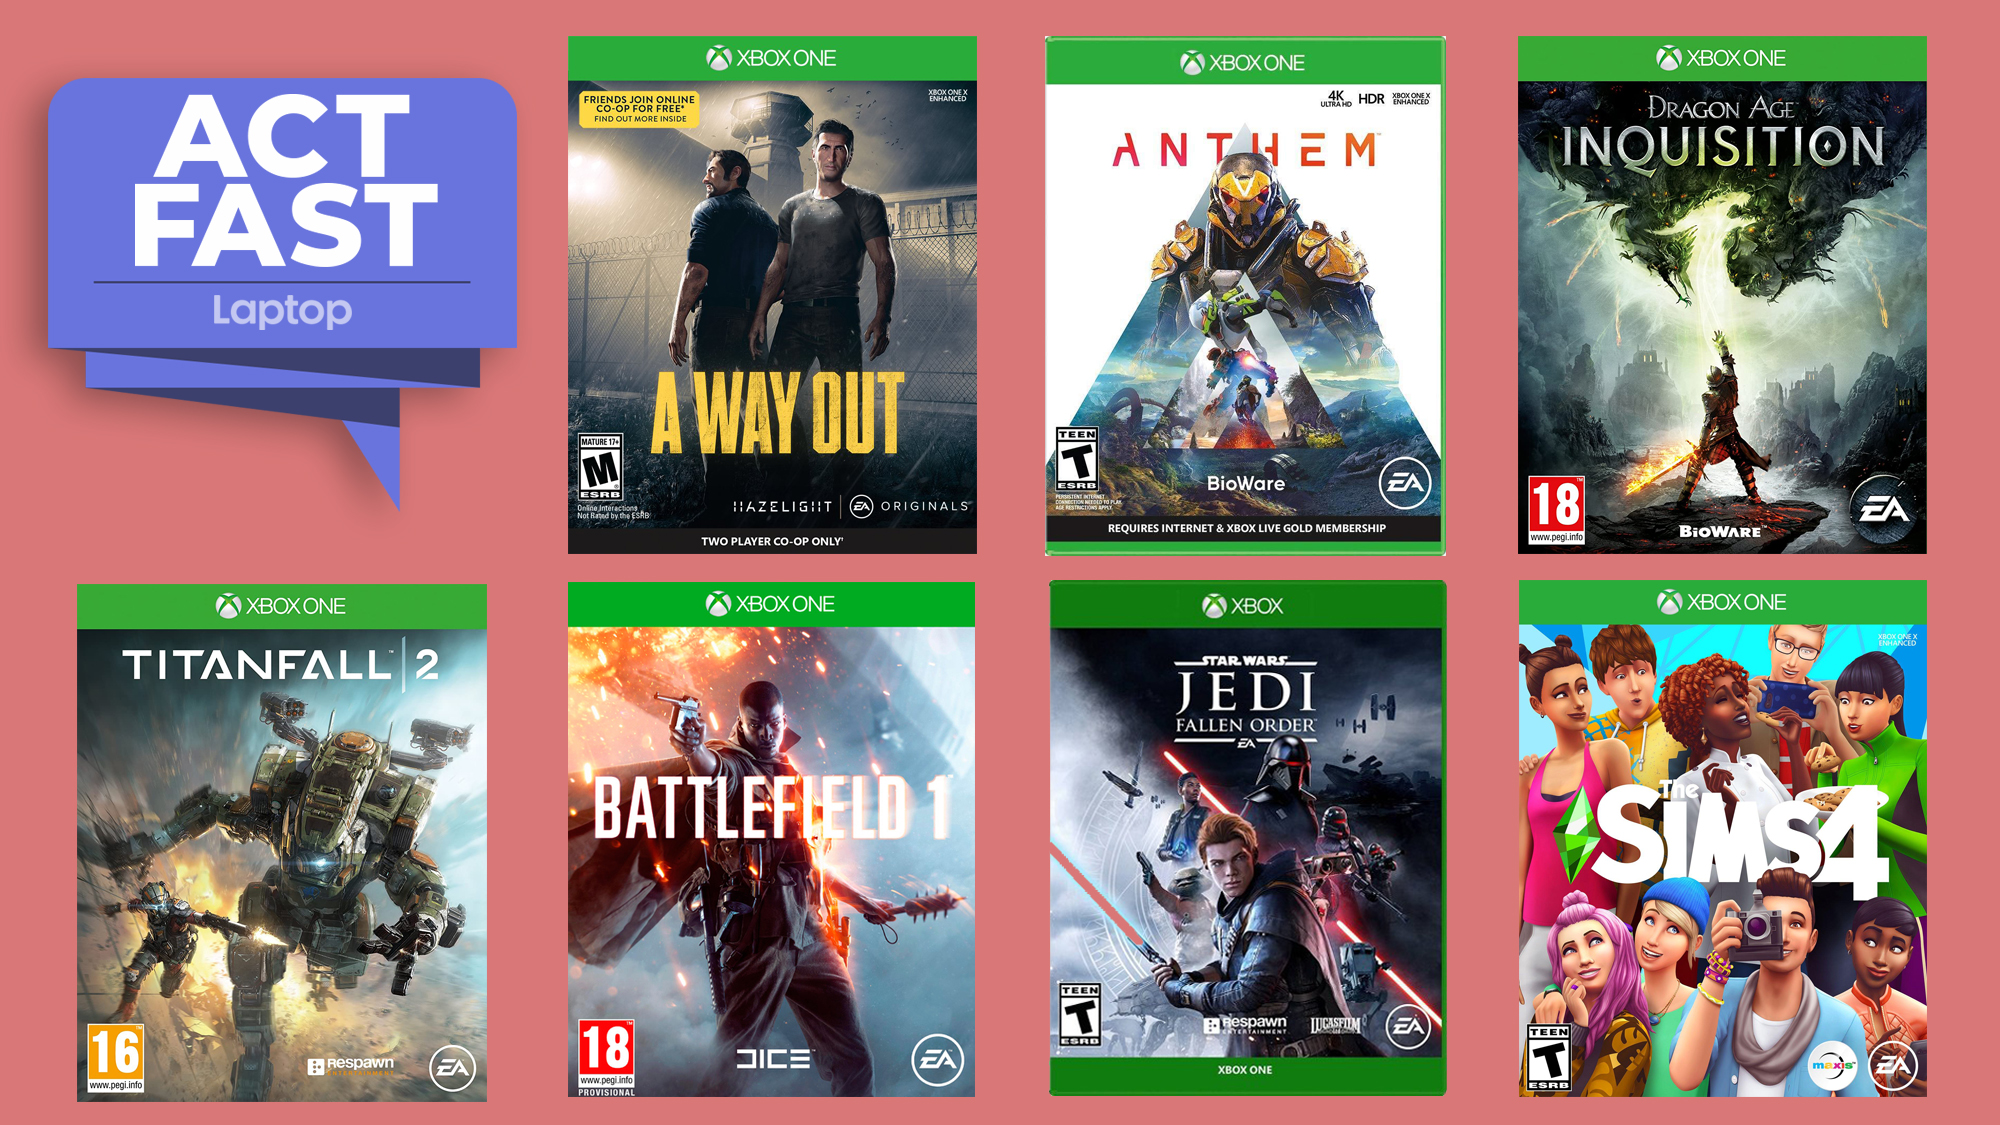 Get the best EA games for up to 85% off in this Xbox Black Friday deal:  Save on Star Wars, Battlefield and more